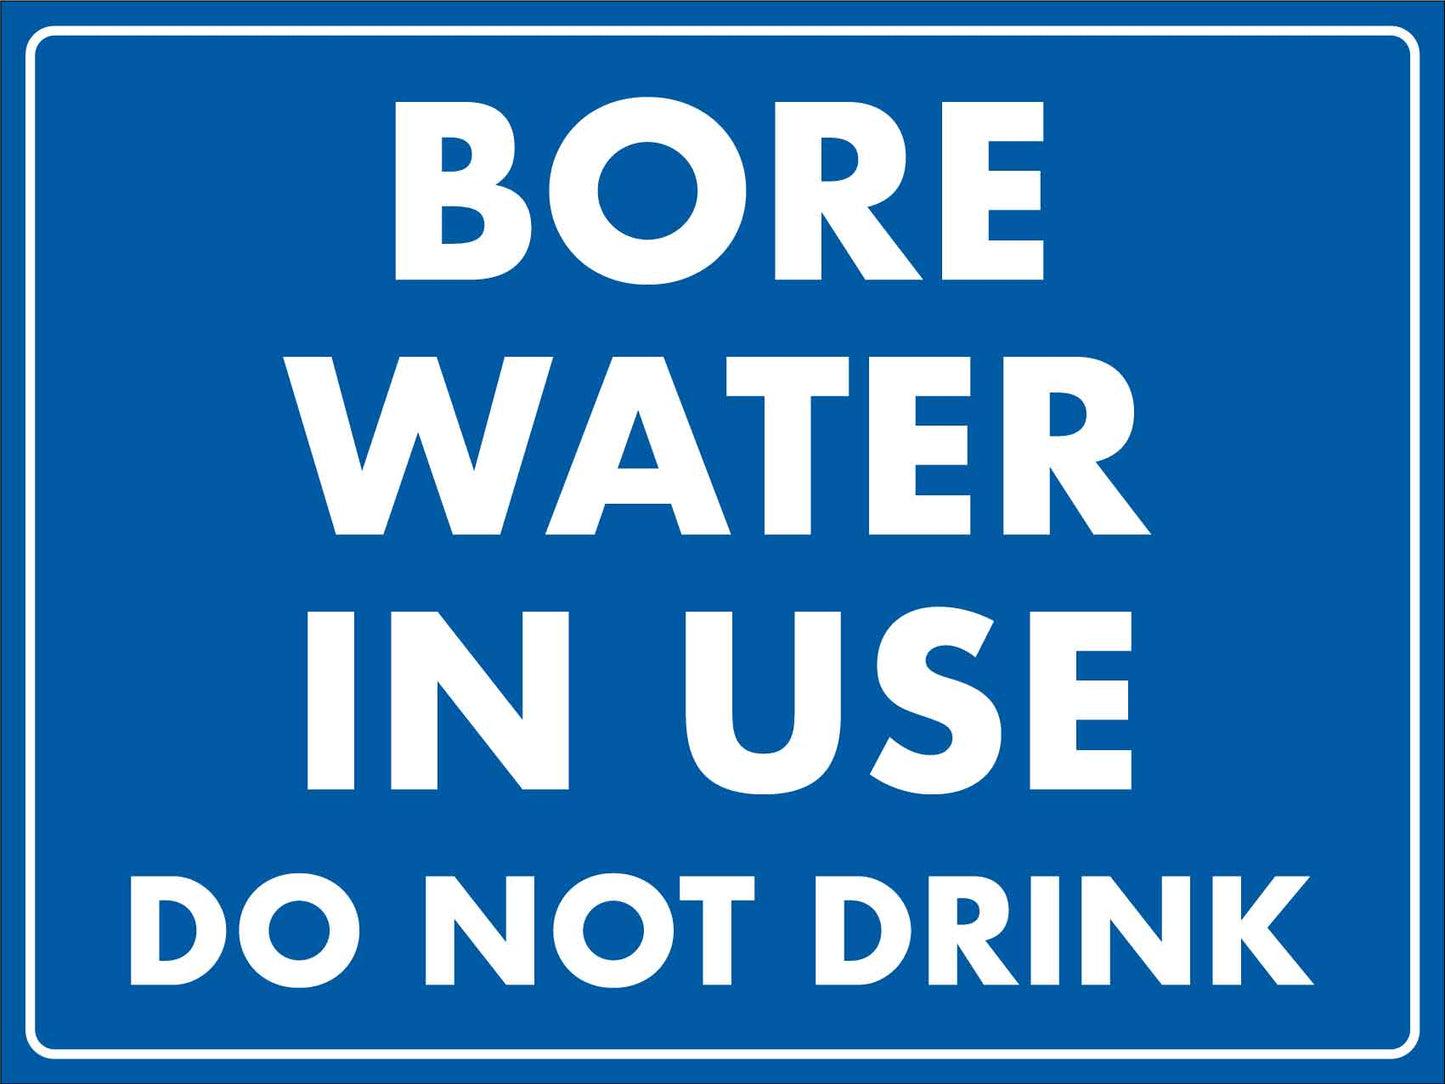 Bore Water In Use Do Not Drink - Blue Sign